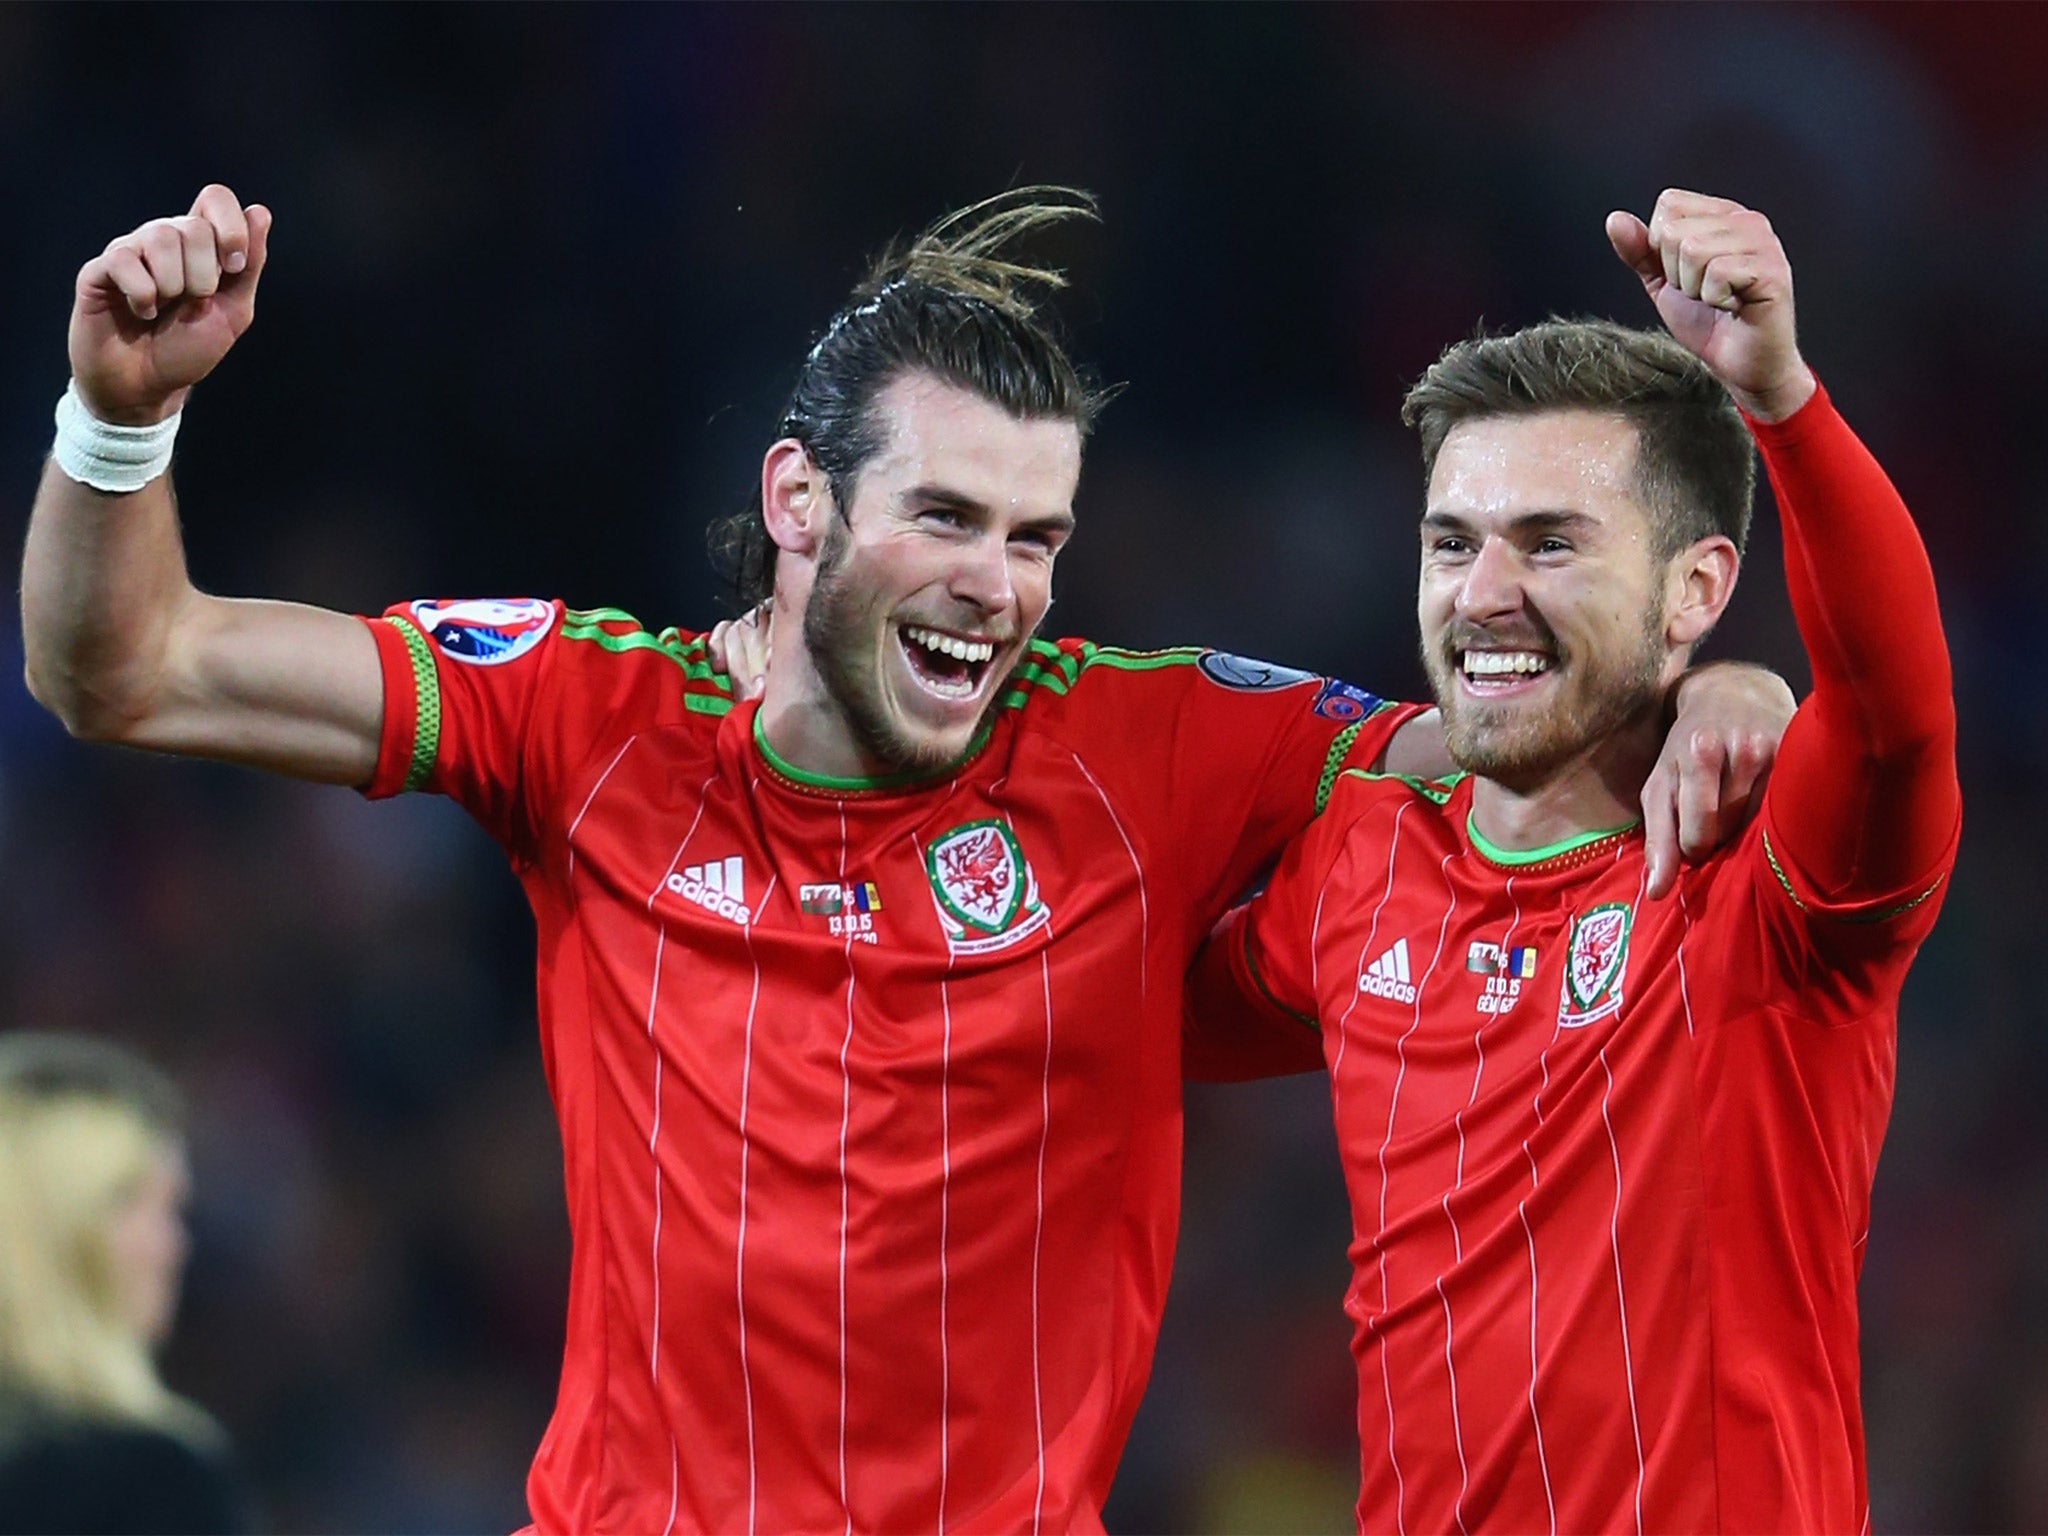 Gareth Bale and Aaron Ramsey were Wales’ scorers in the 2-0 win over Andorra at the Cardiff City Stadium